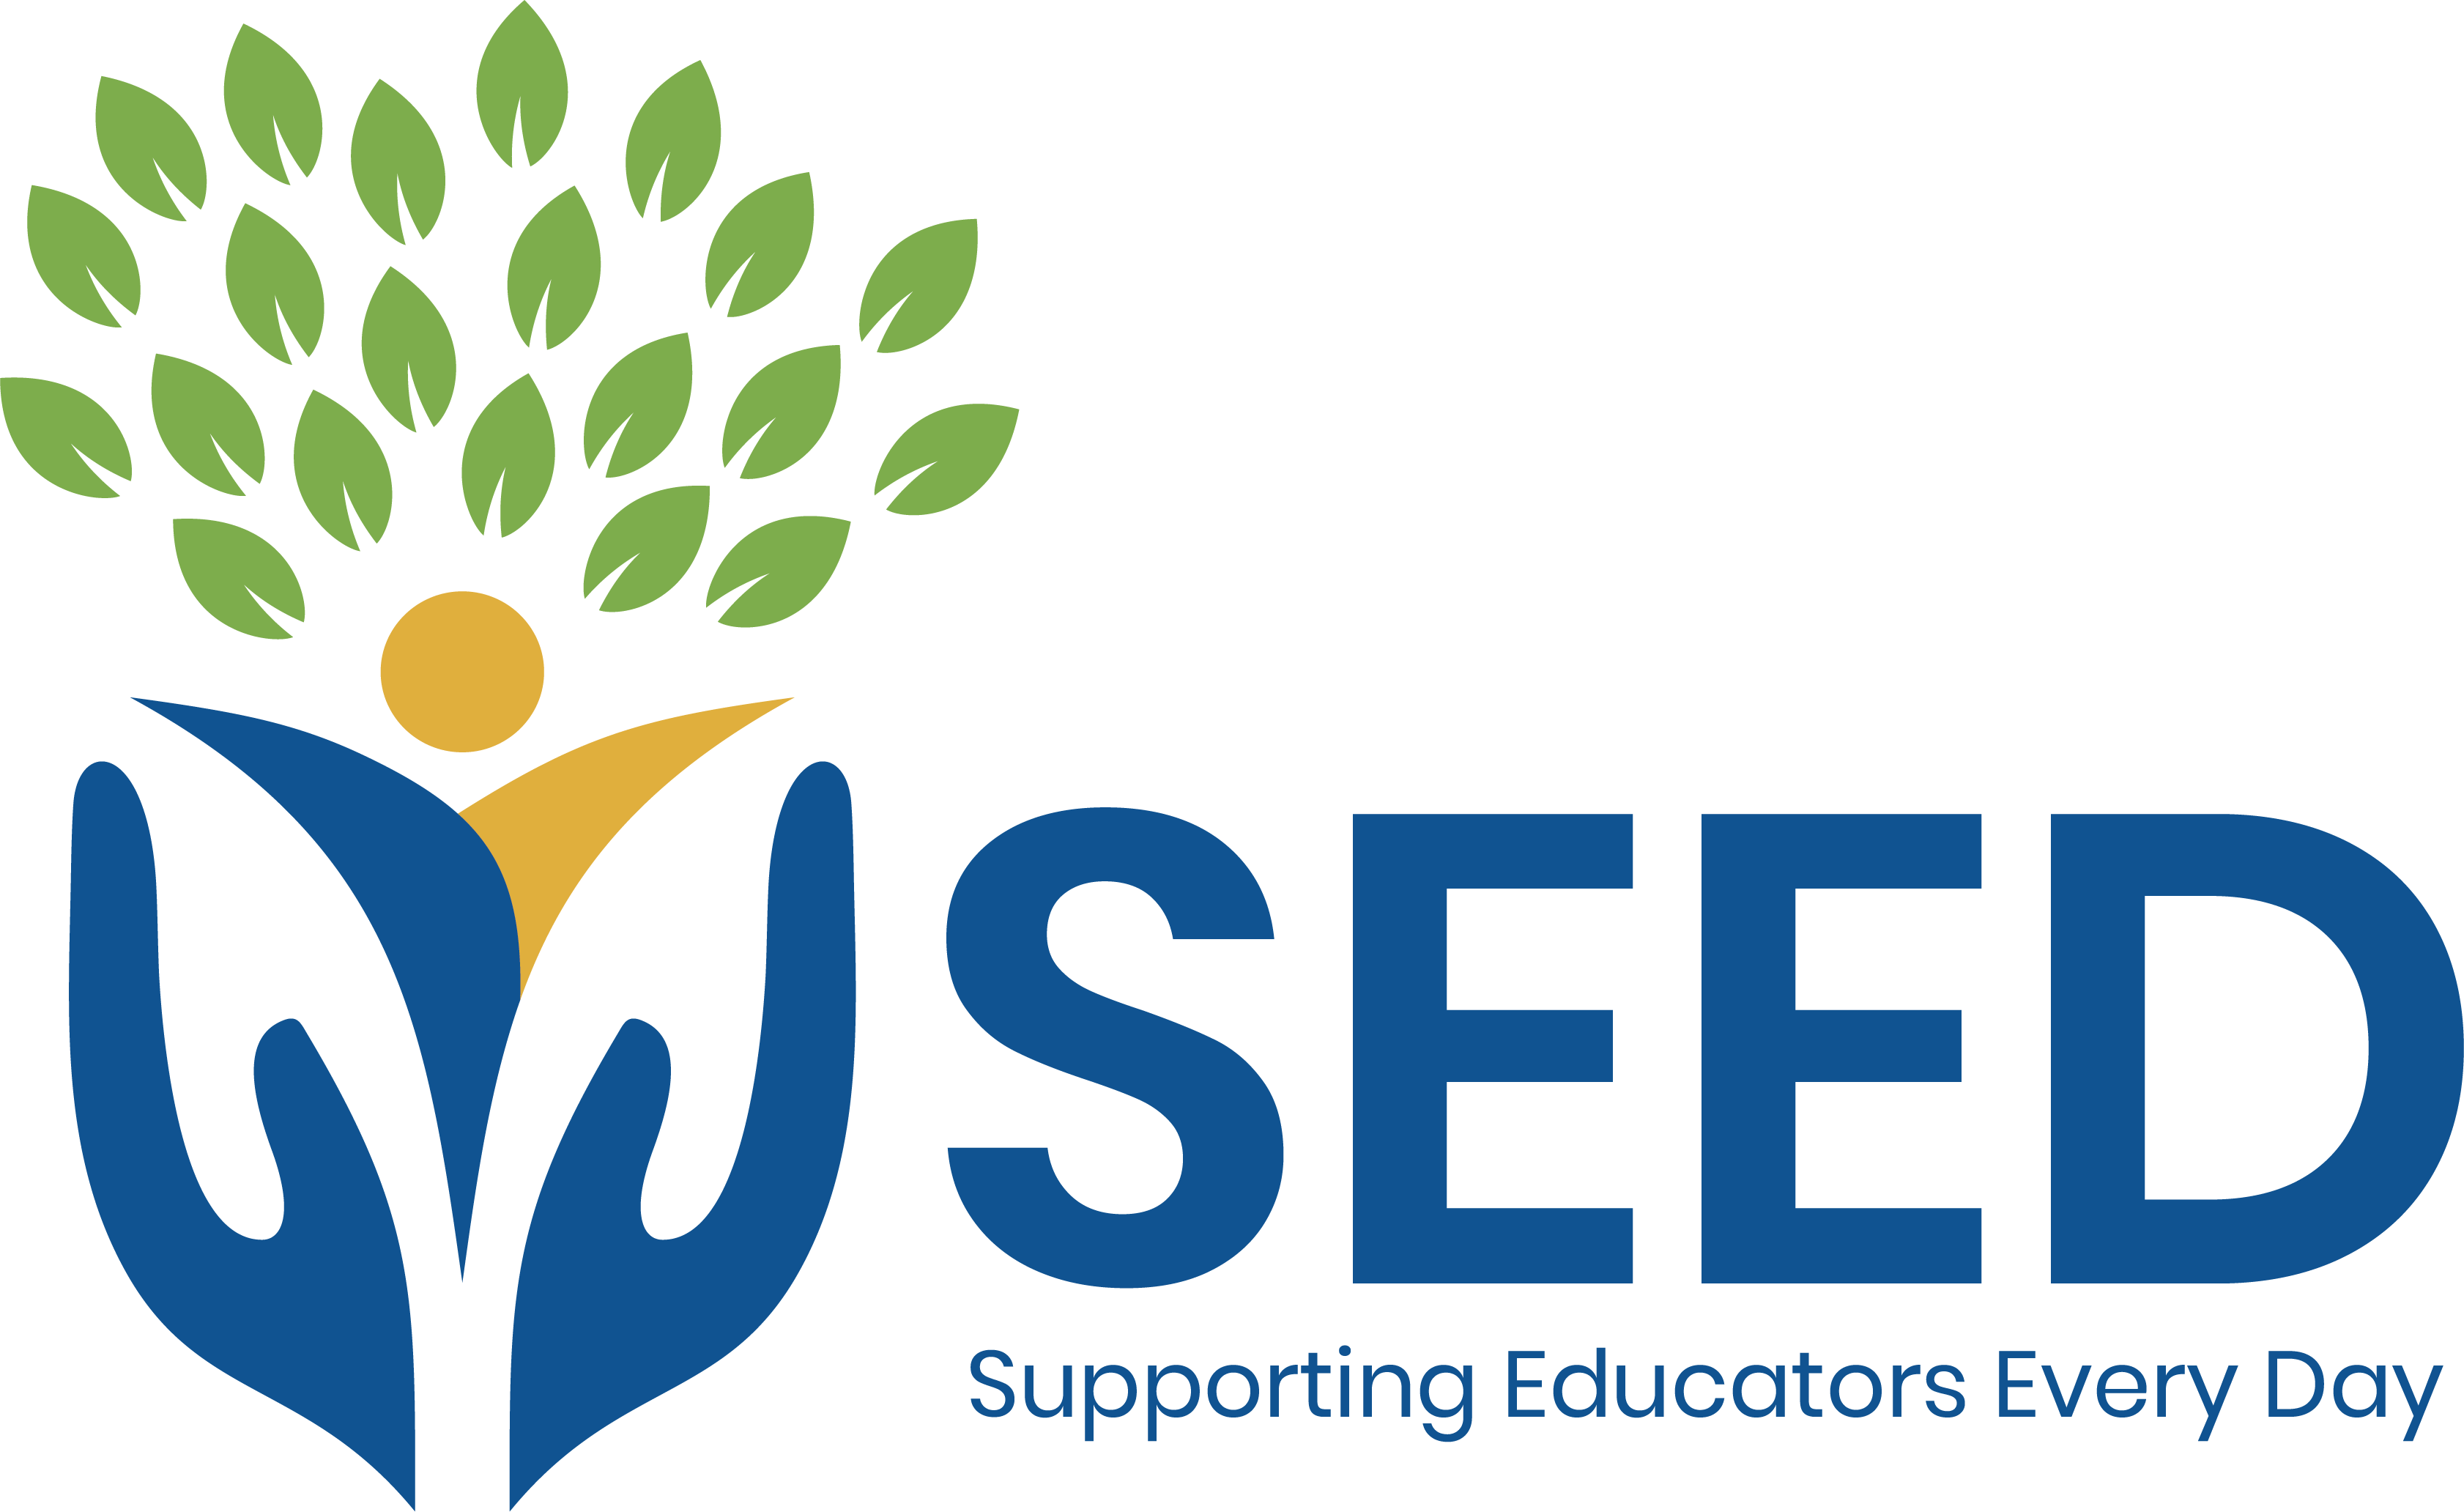 SEED logo with blue text SEED and Supporting Educators Every Day.  Logo shows a pair of hands opened with a cartoon figure and leaves above.